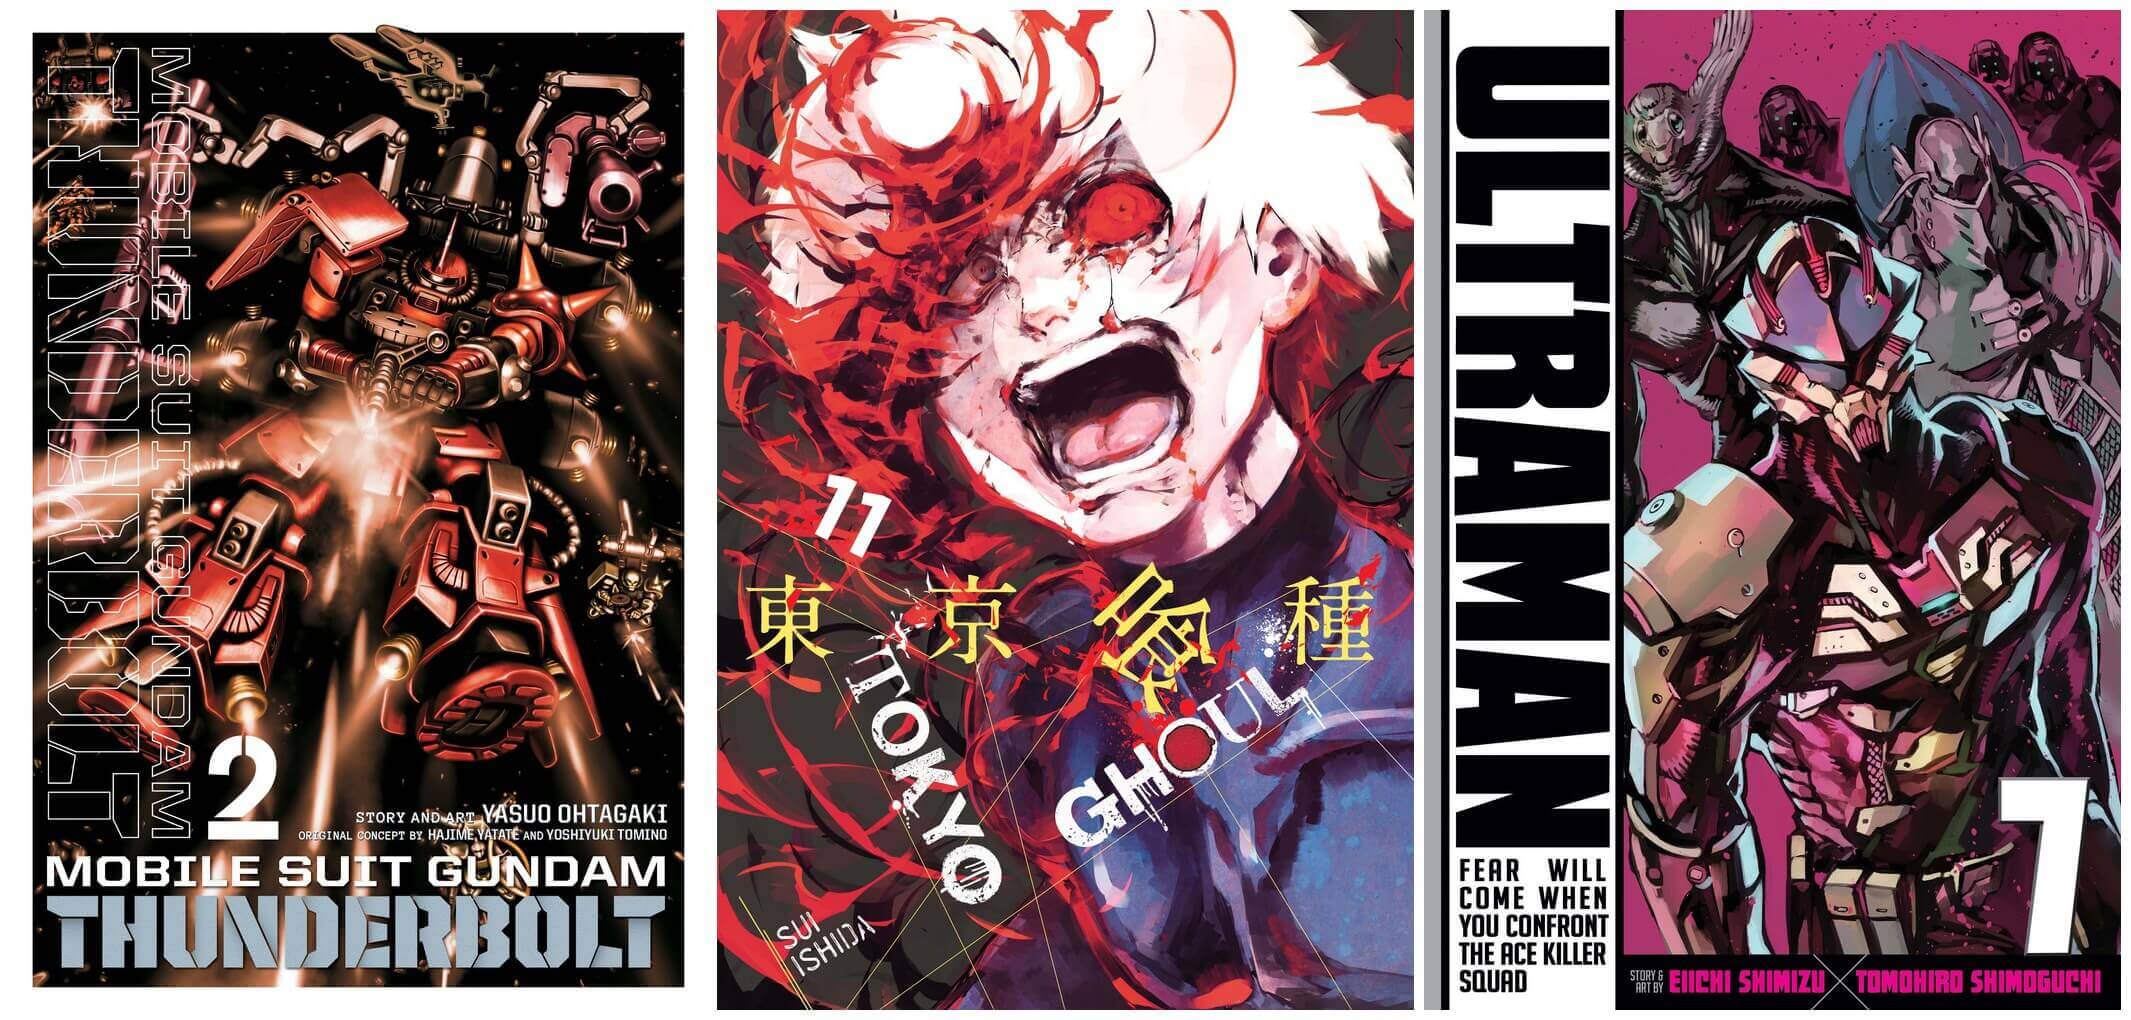 February 2017 Manga Releases Covers of Mobile Suit Gundam Thunderbolt, Tokyo Ghoul, and Ultraman.